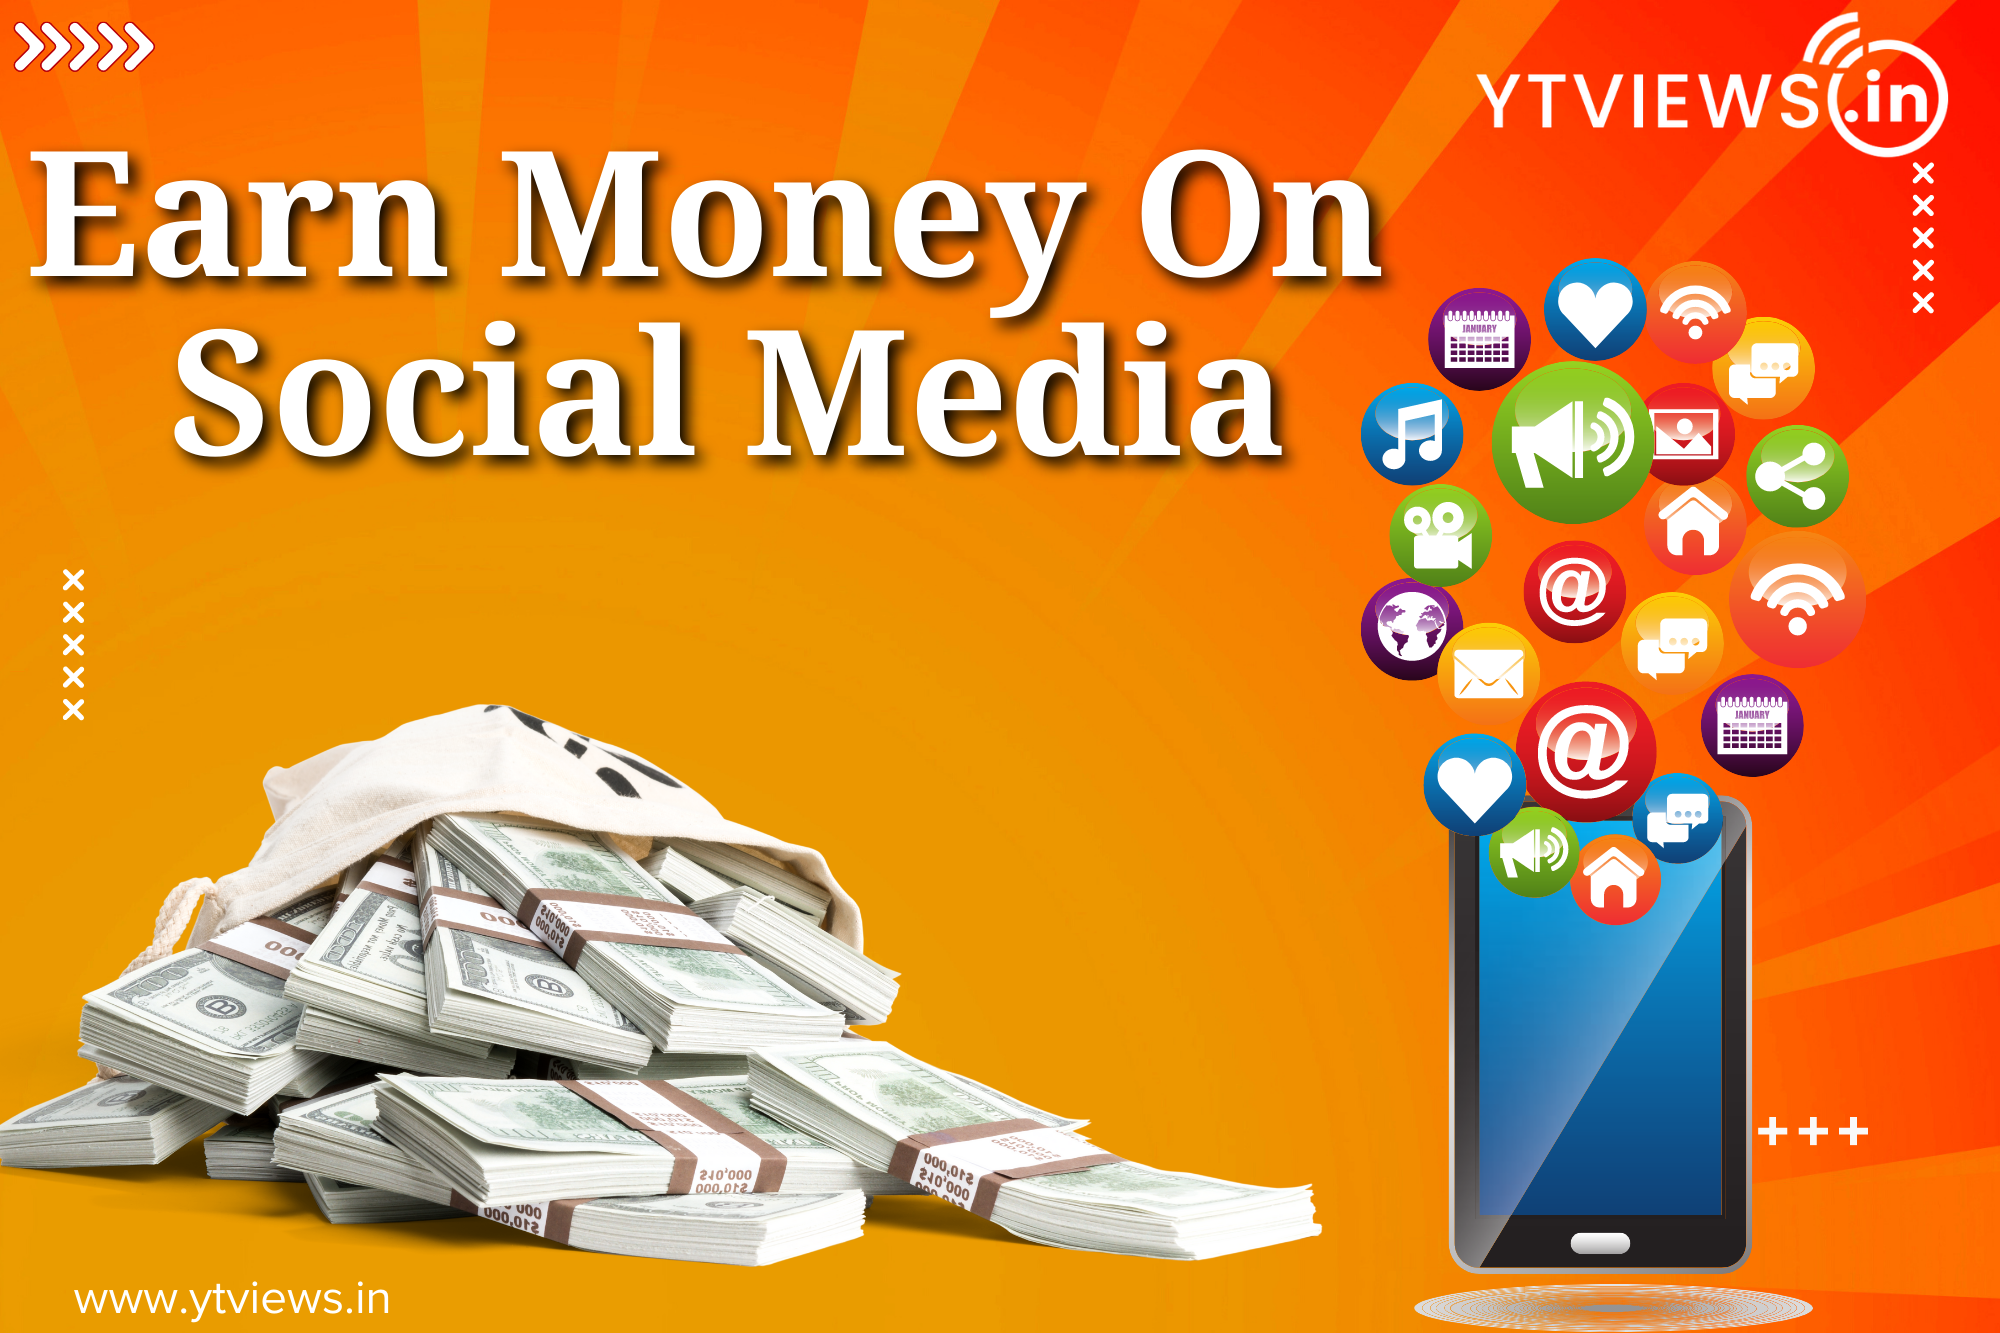 What are the different methods to generate revenue on social media platforms?